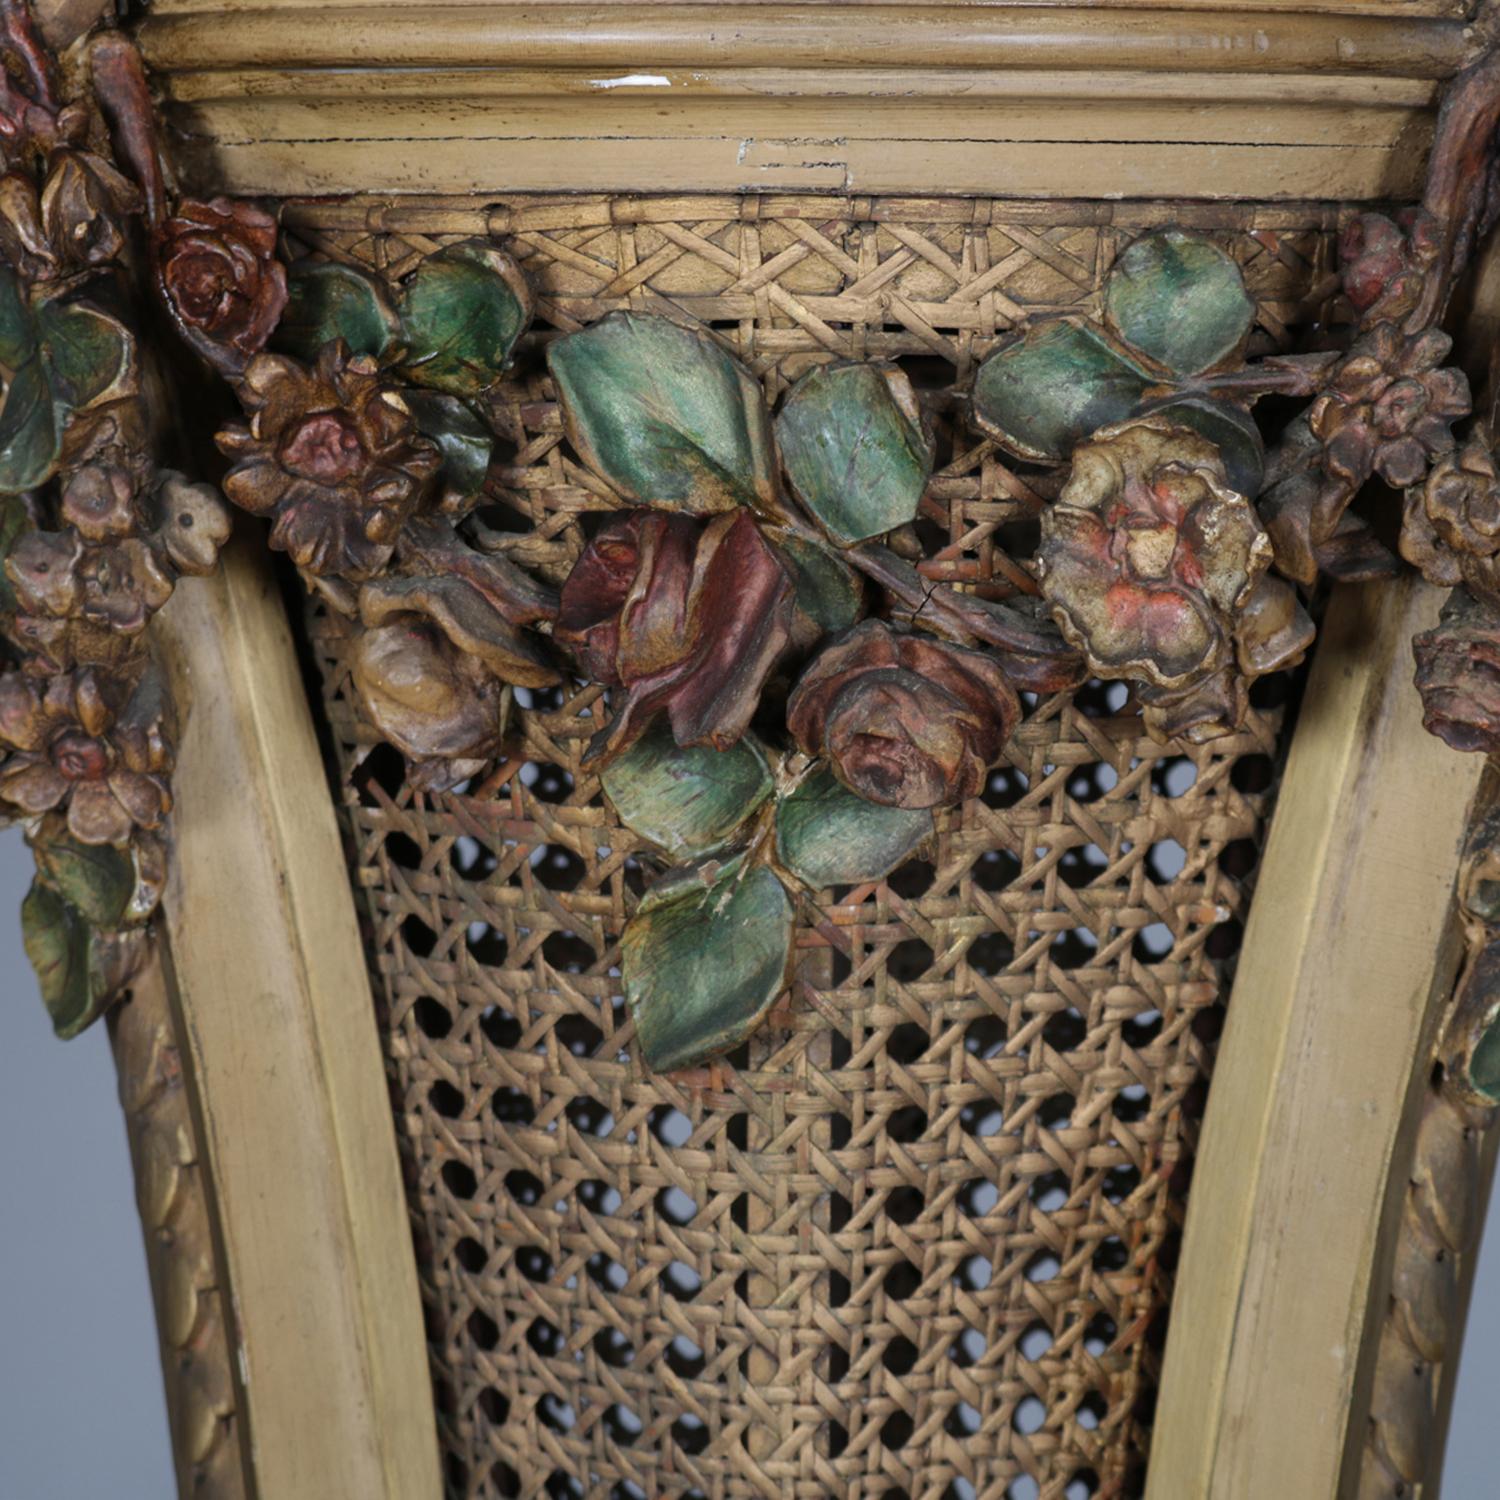 Carved Antique French Neoclassical Polychromed Figural Giltwood Planter with Ram